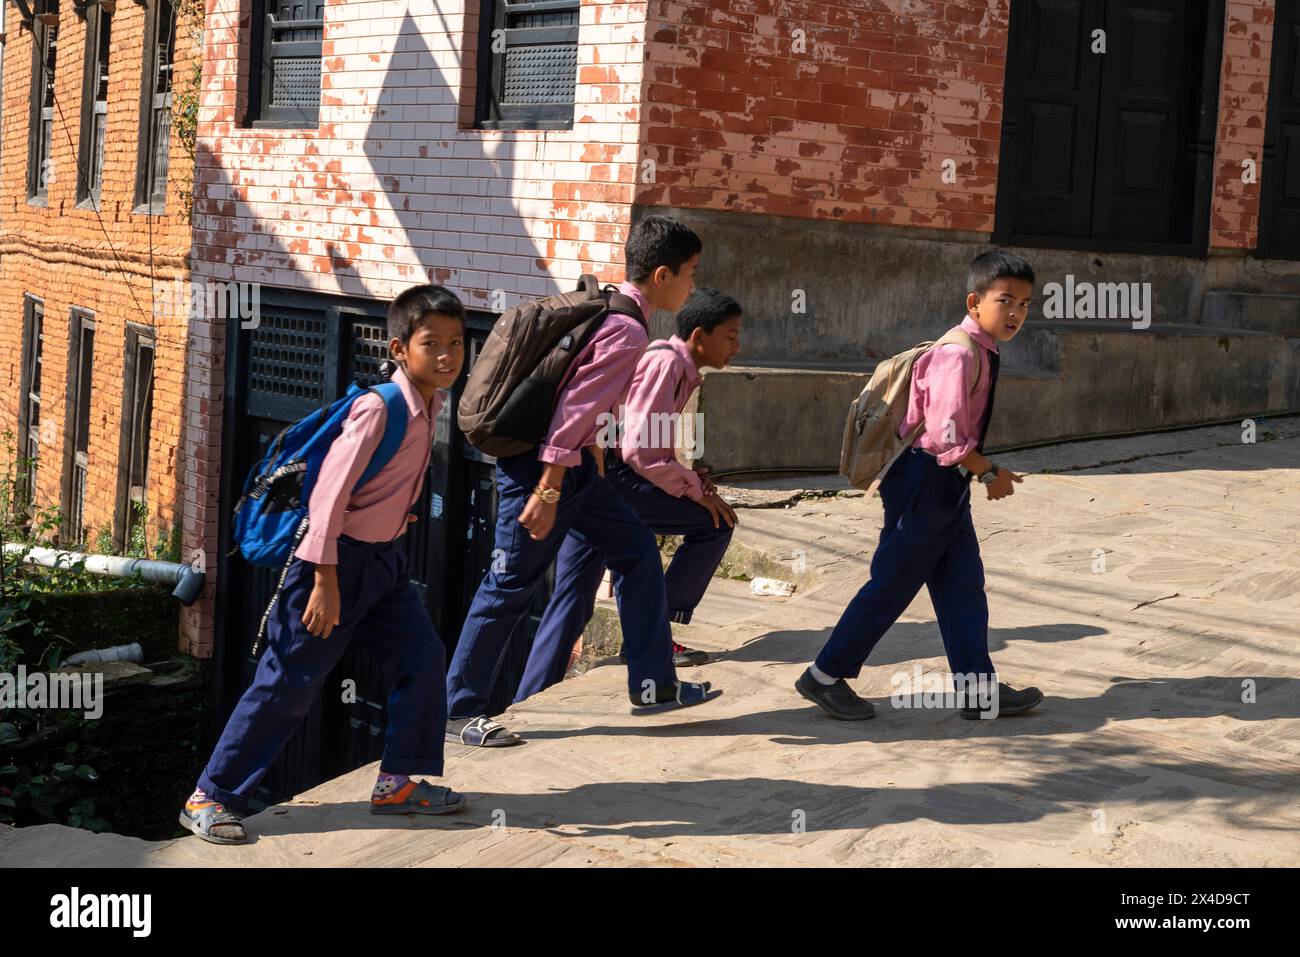 Asia, Nepal, Bandipur. Young boys walking to school (Editorial Use Only) Stock Photo